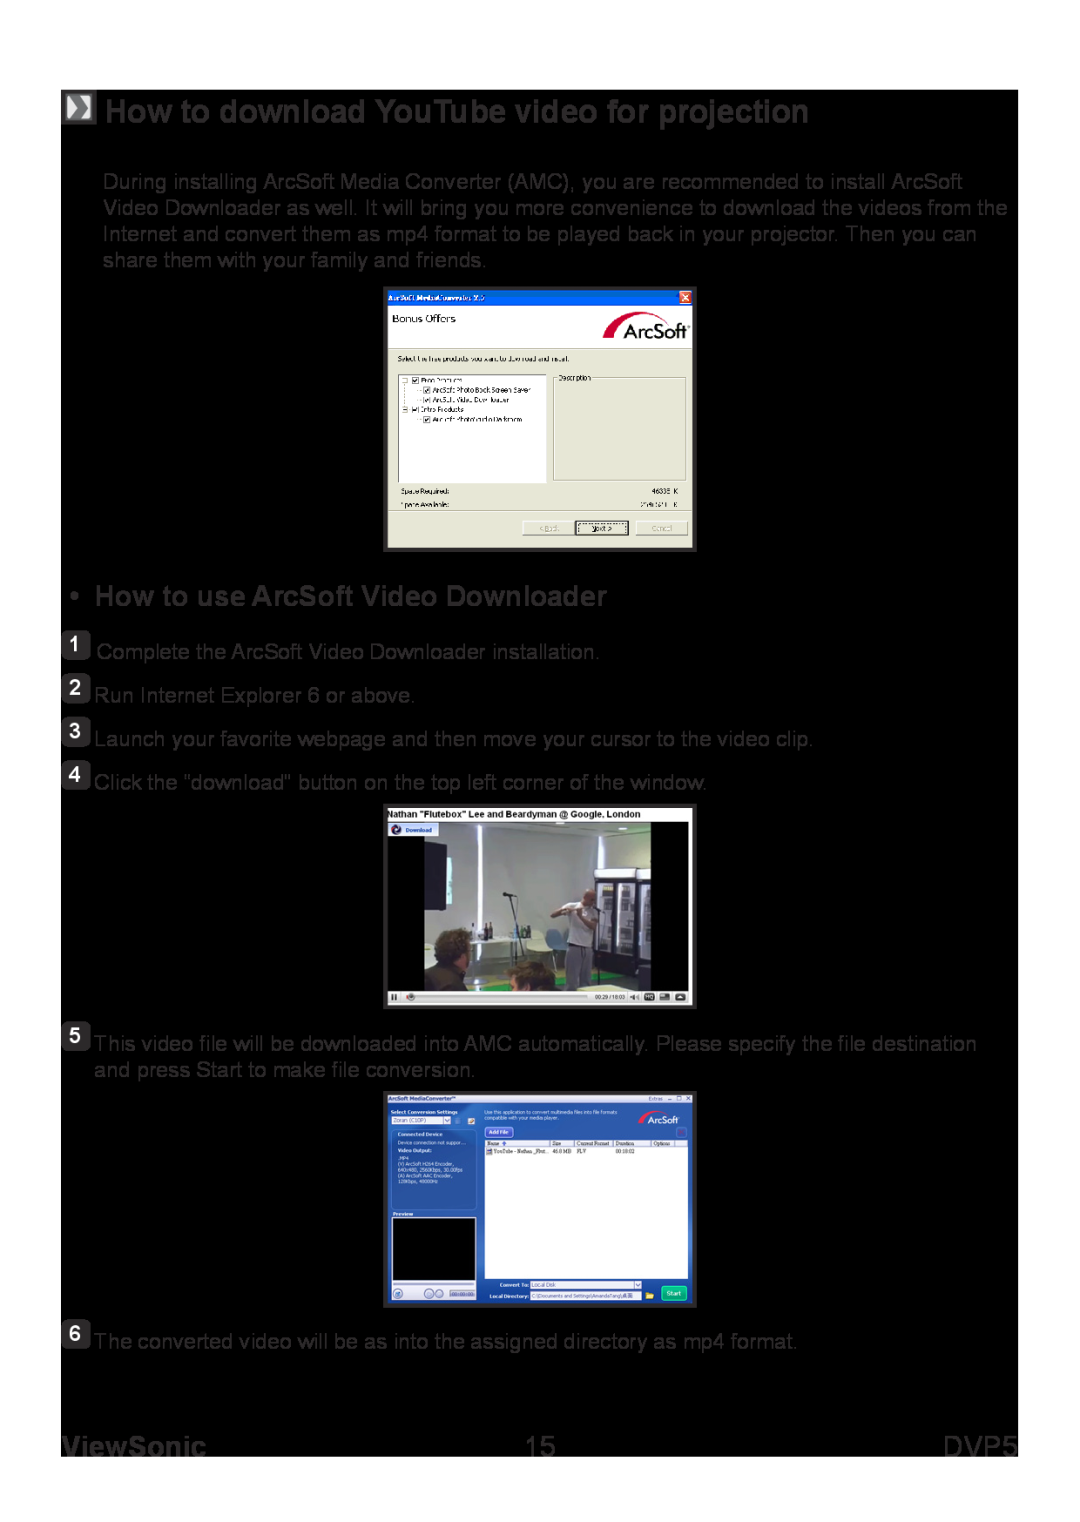 ViewSonic VS13783 How to download YouTube video for projection, How to use ArcSoft Video Downloader, ViewSonic, DVP5 